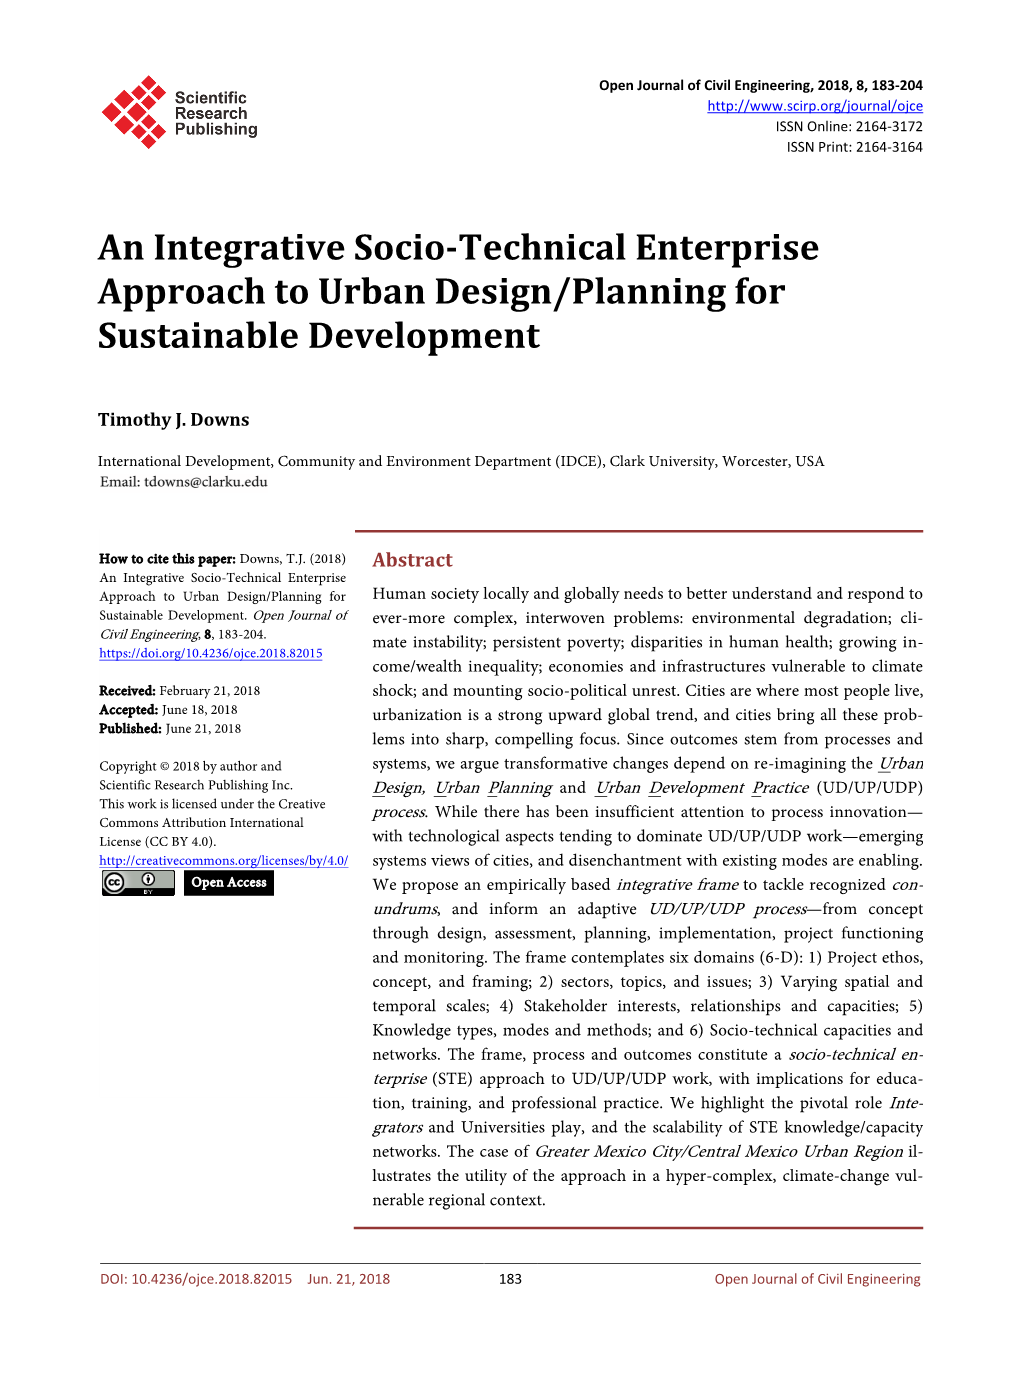 An Integrative Socio-Technical Enterprise Approach to Urban Design/Planning for Sustainable Development